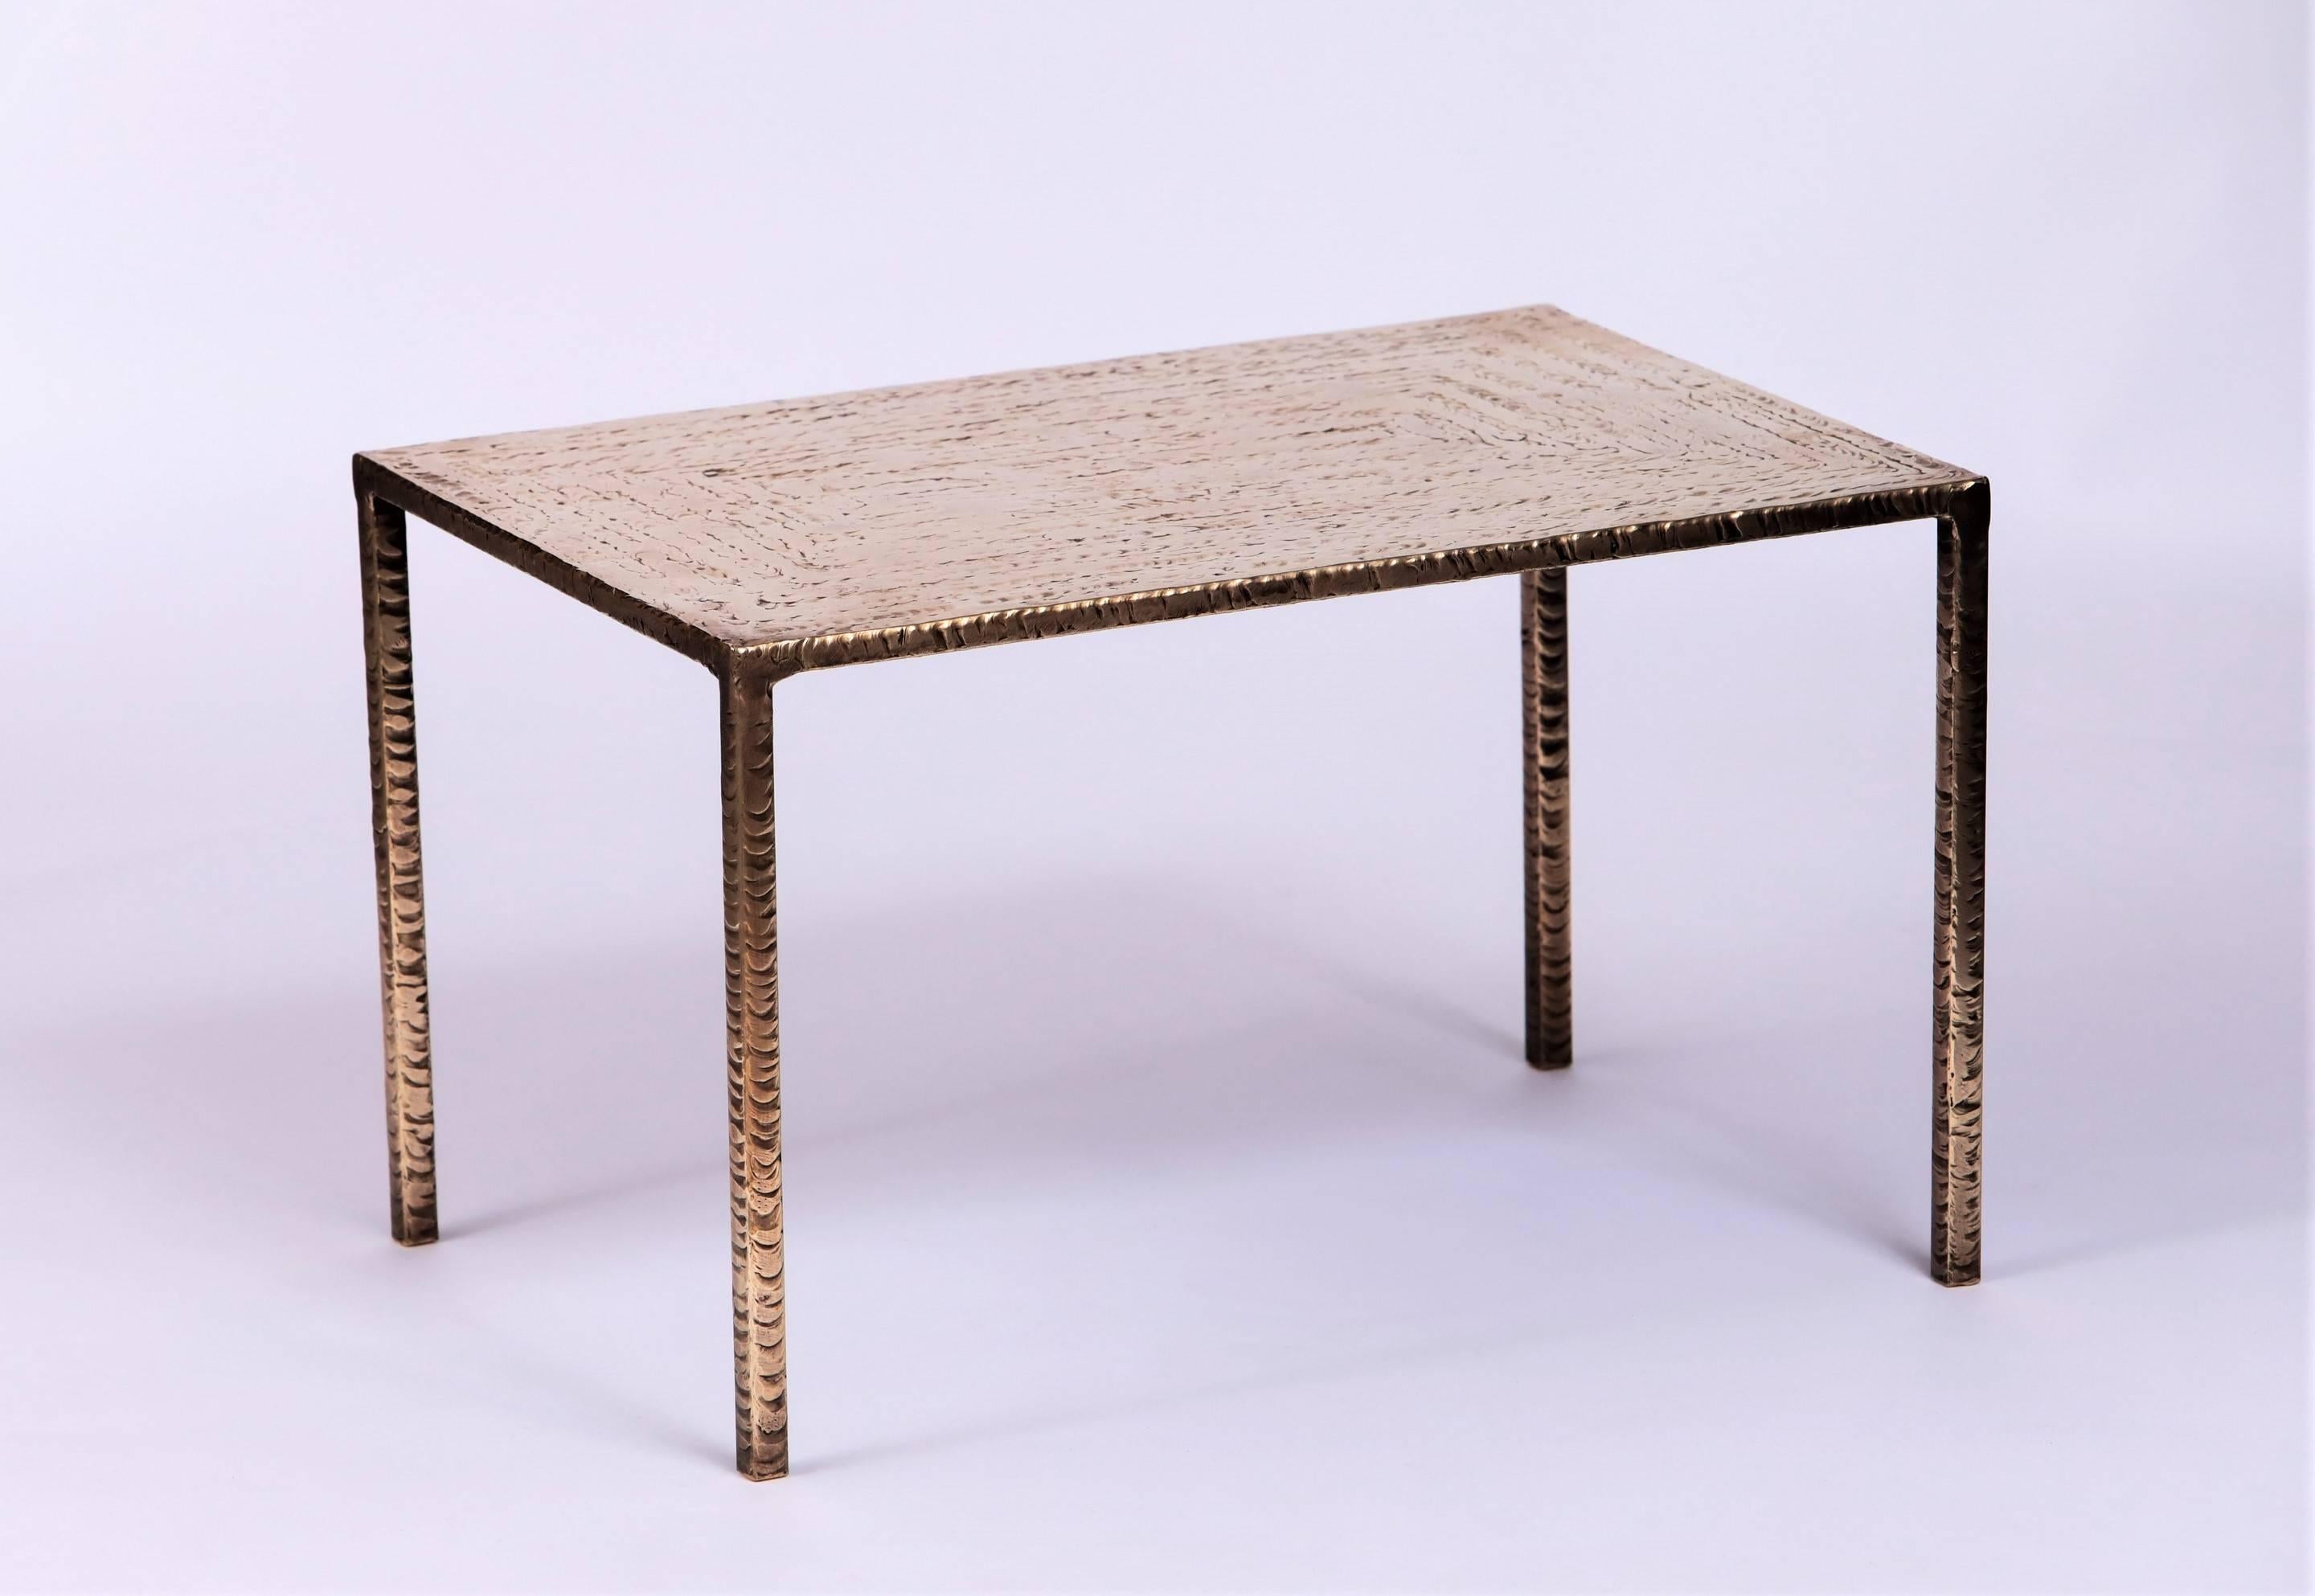 A pair of intricately detailed, bronze side tables by Costa Coulentianos,
France, circa 1960.